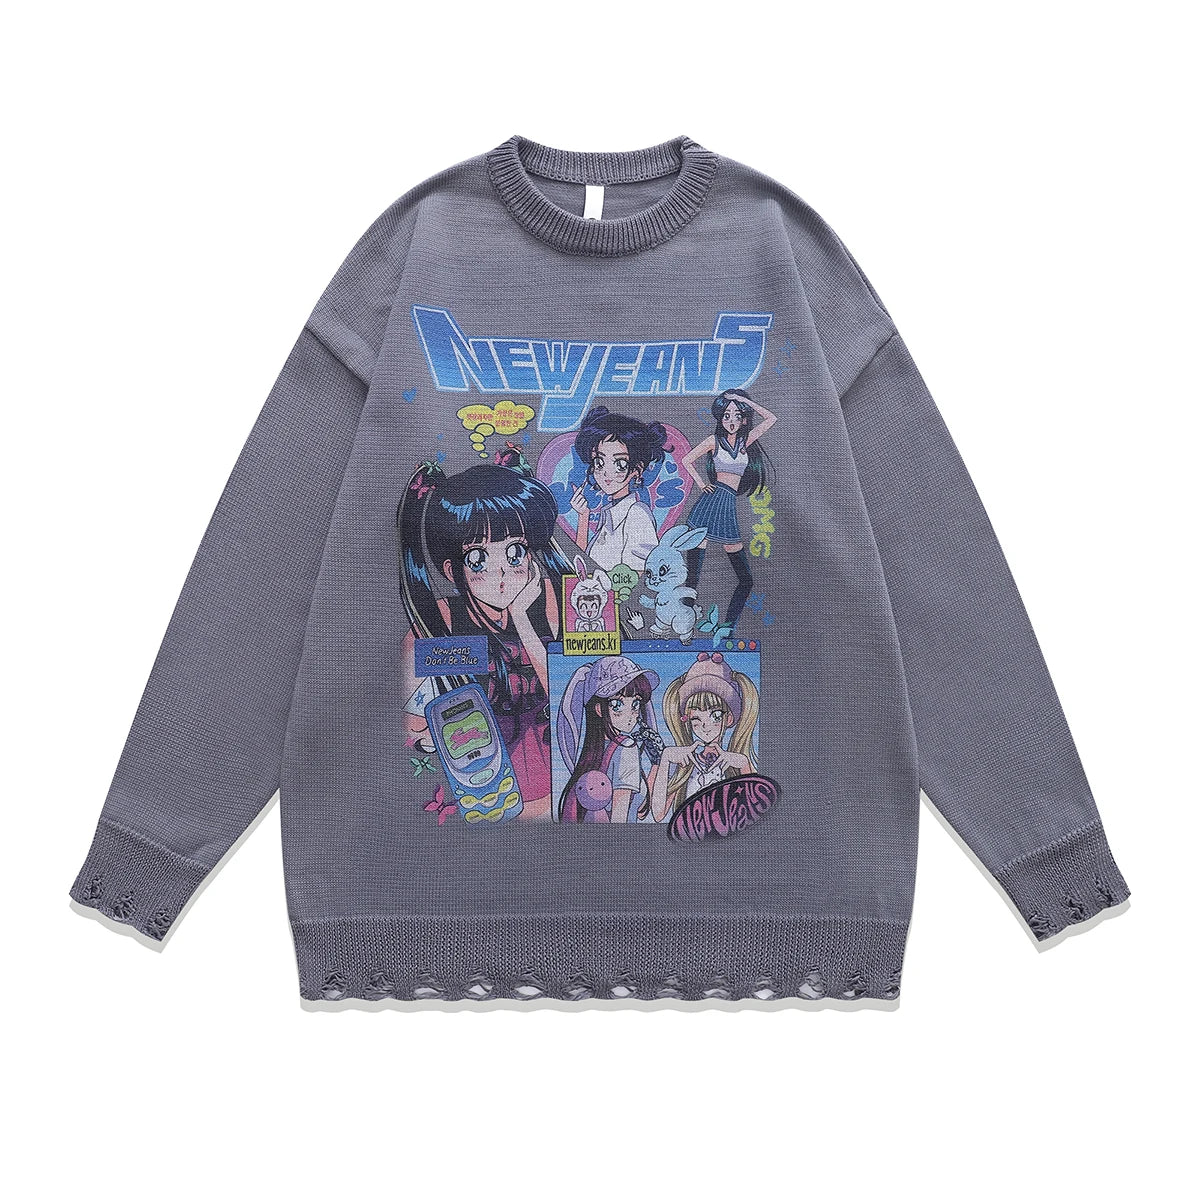 Anime New Jeans Sweater Grey